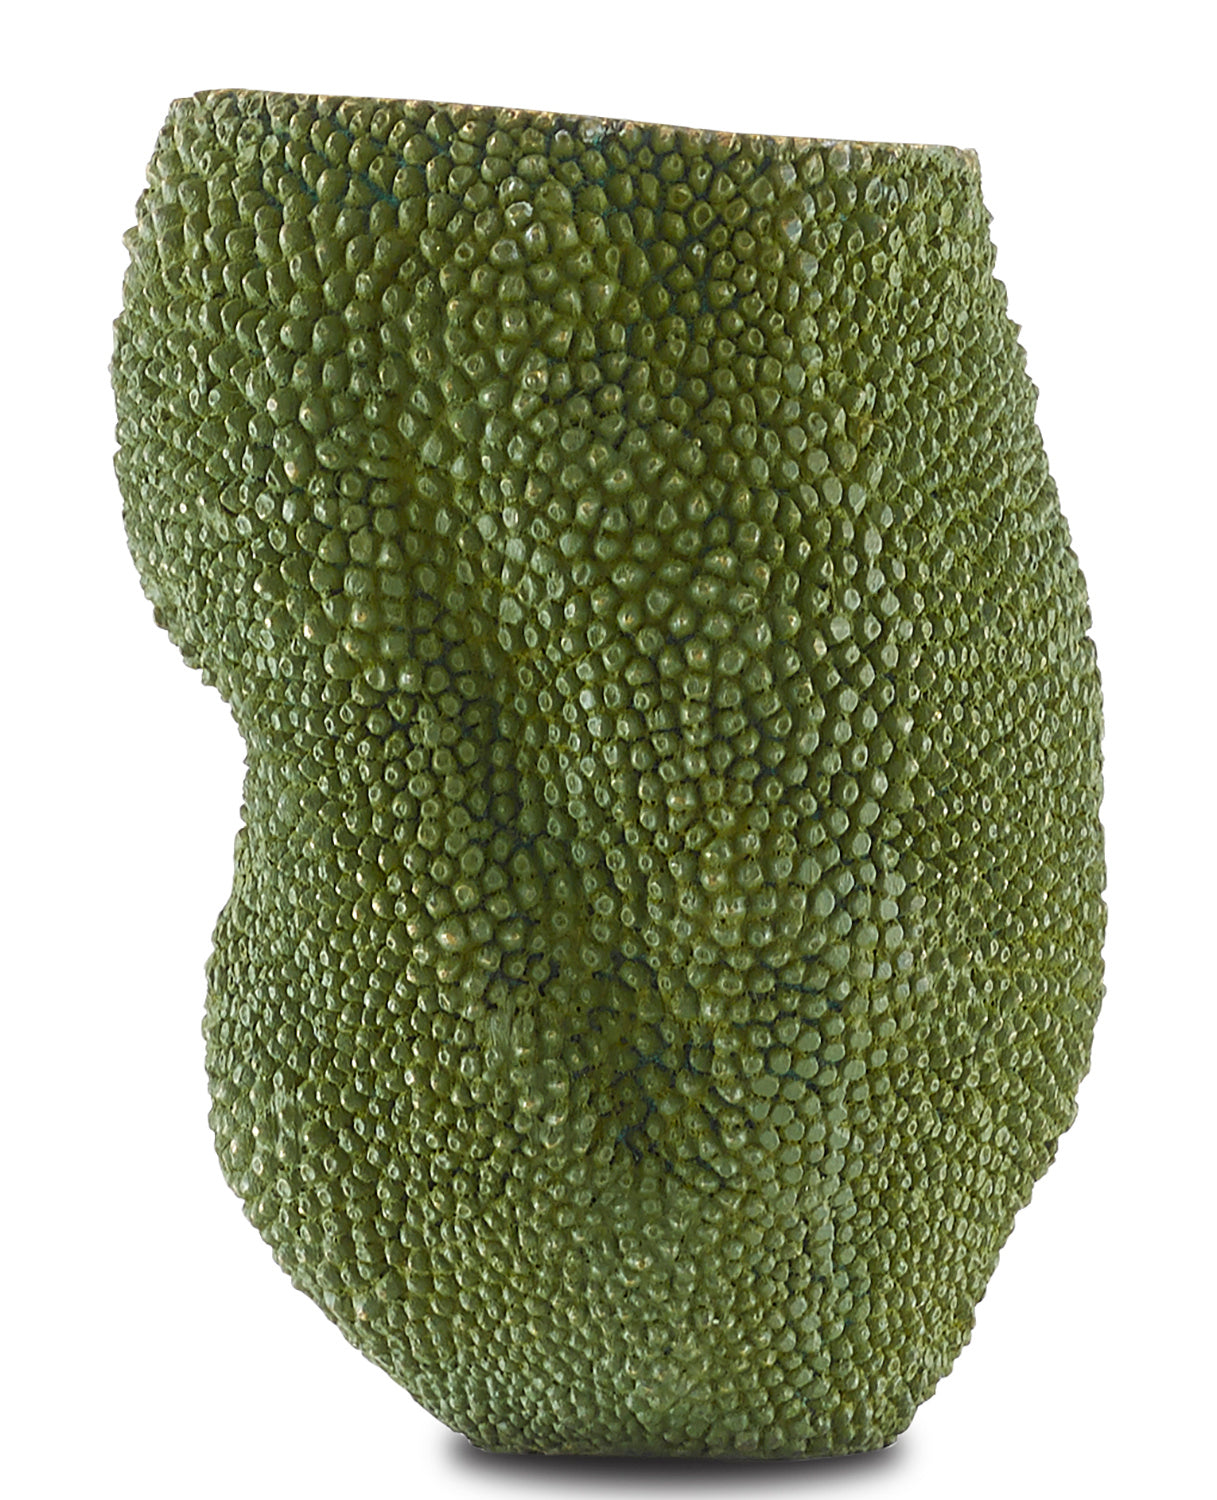 Vase from the Jackfruit collection in Green/Gold finish